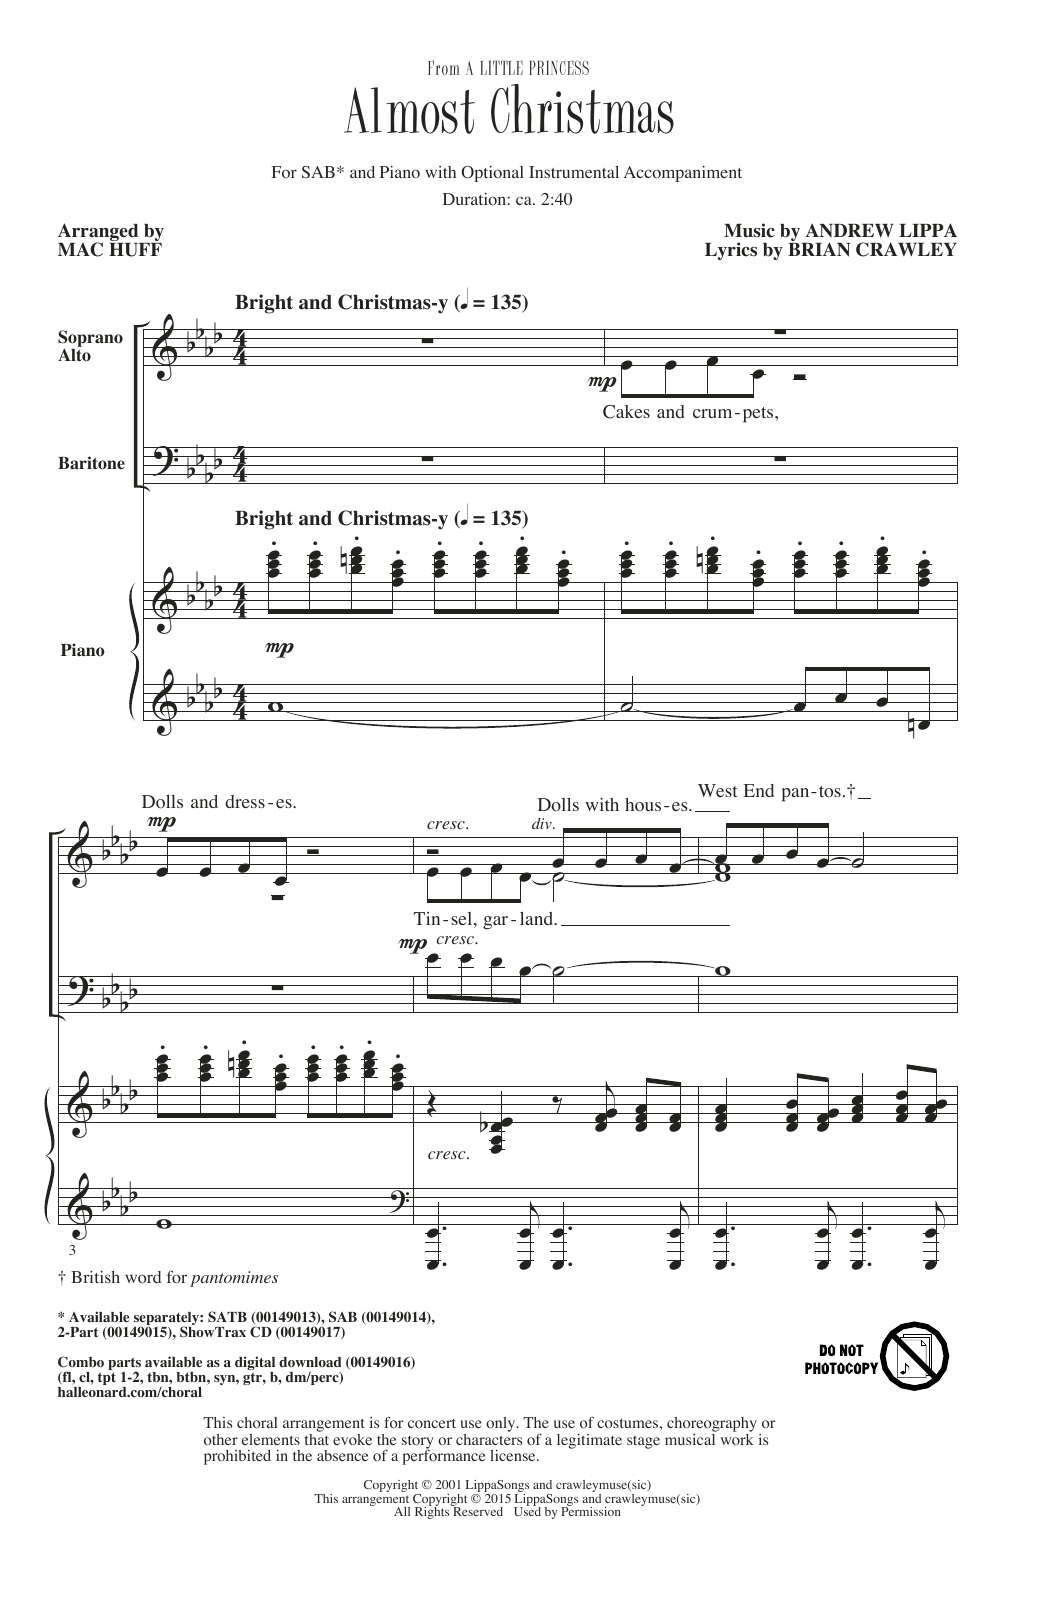 Download Mac Huff Almost Christmas Sheet Music